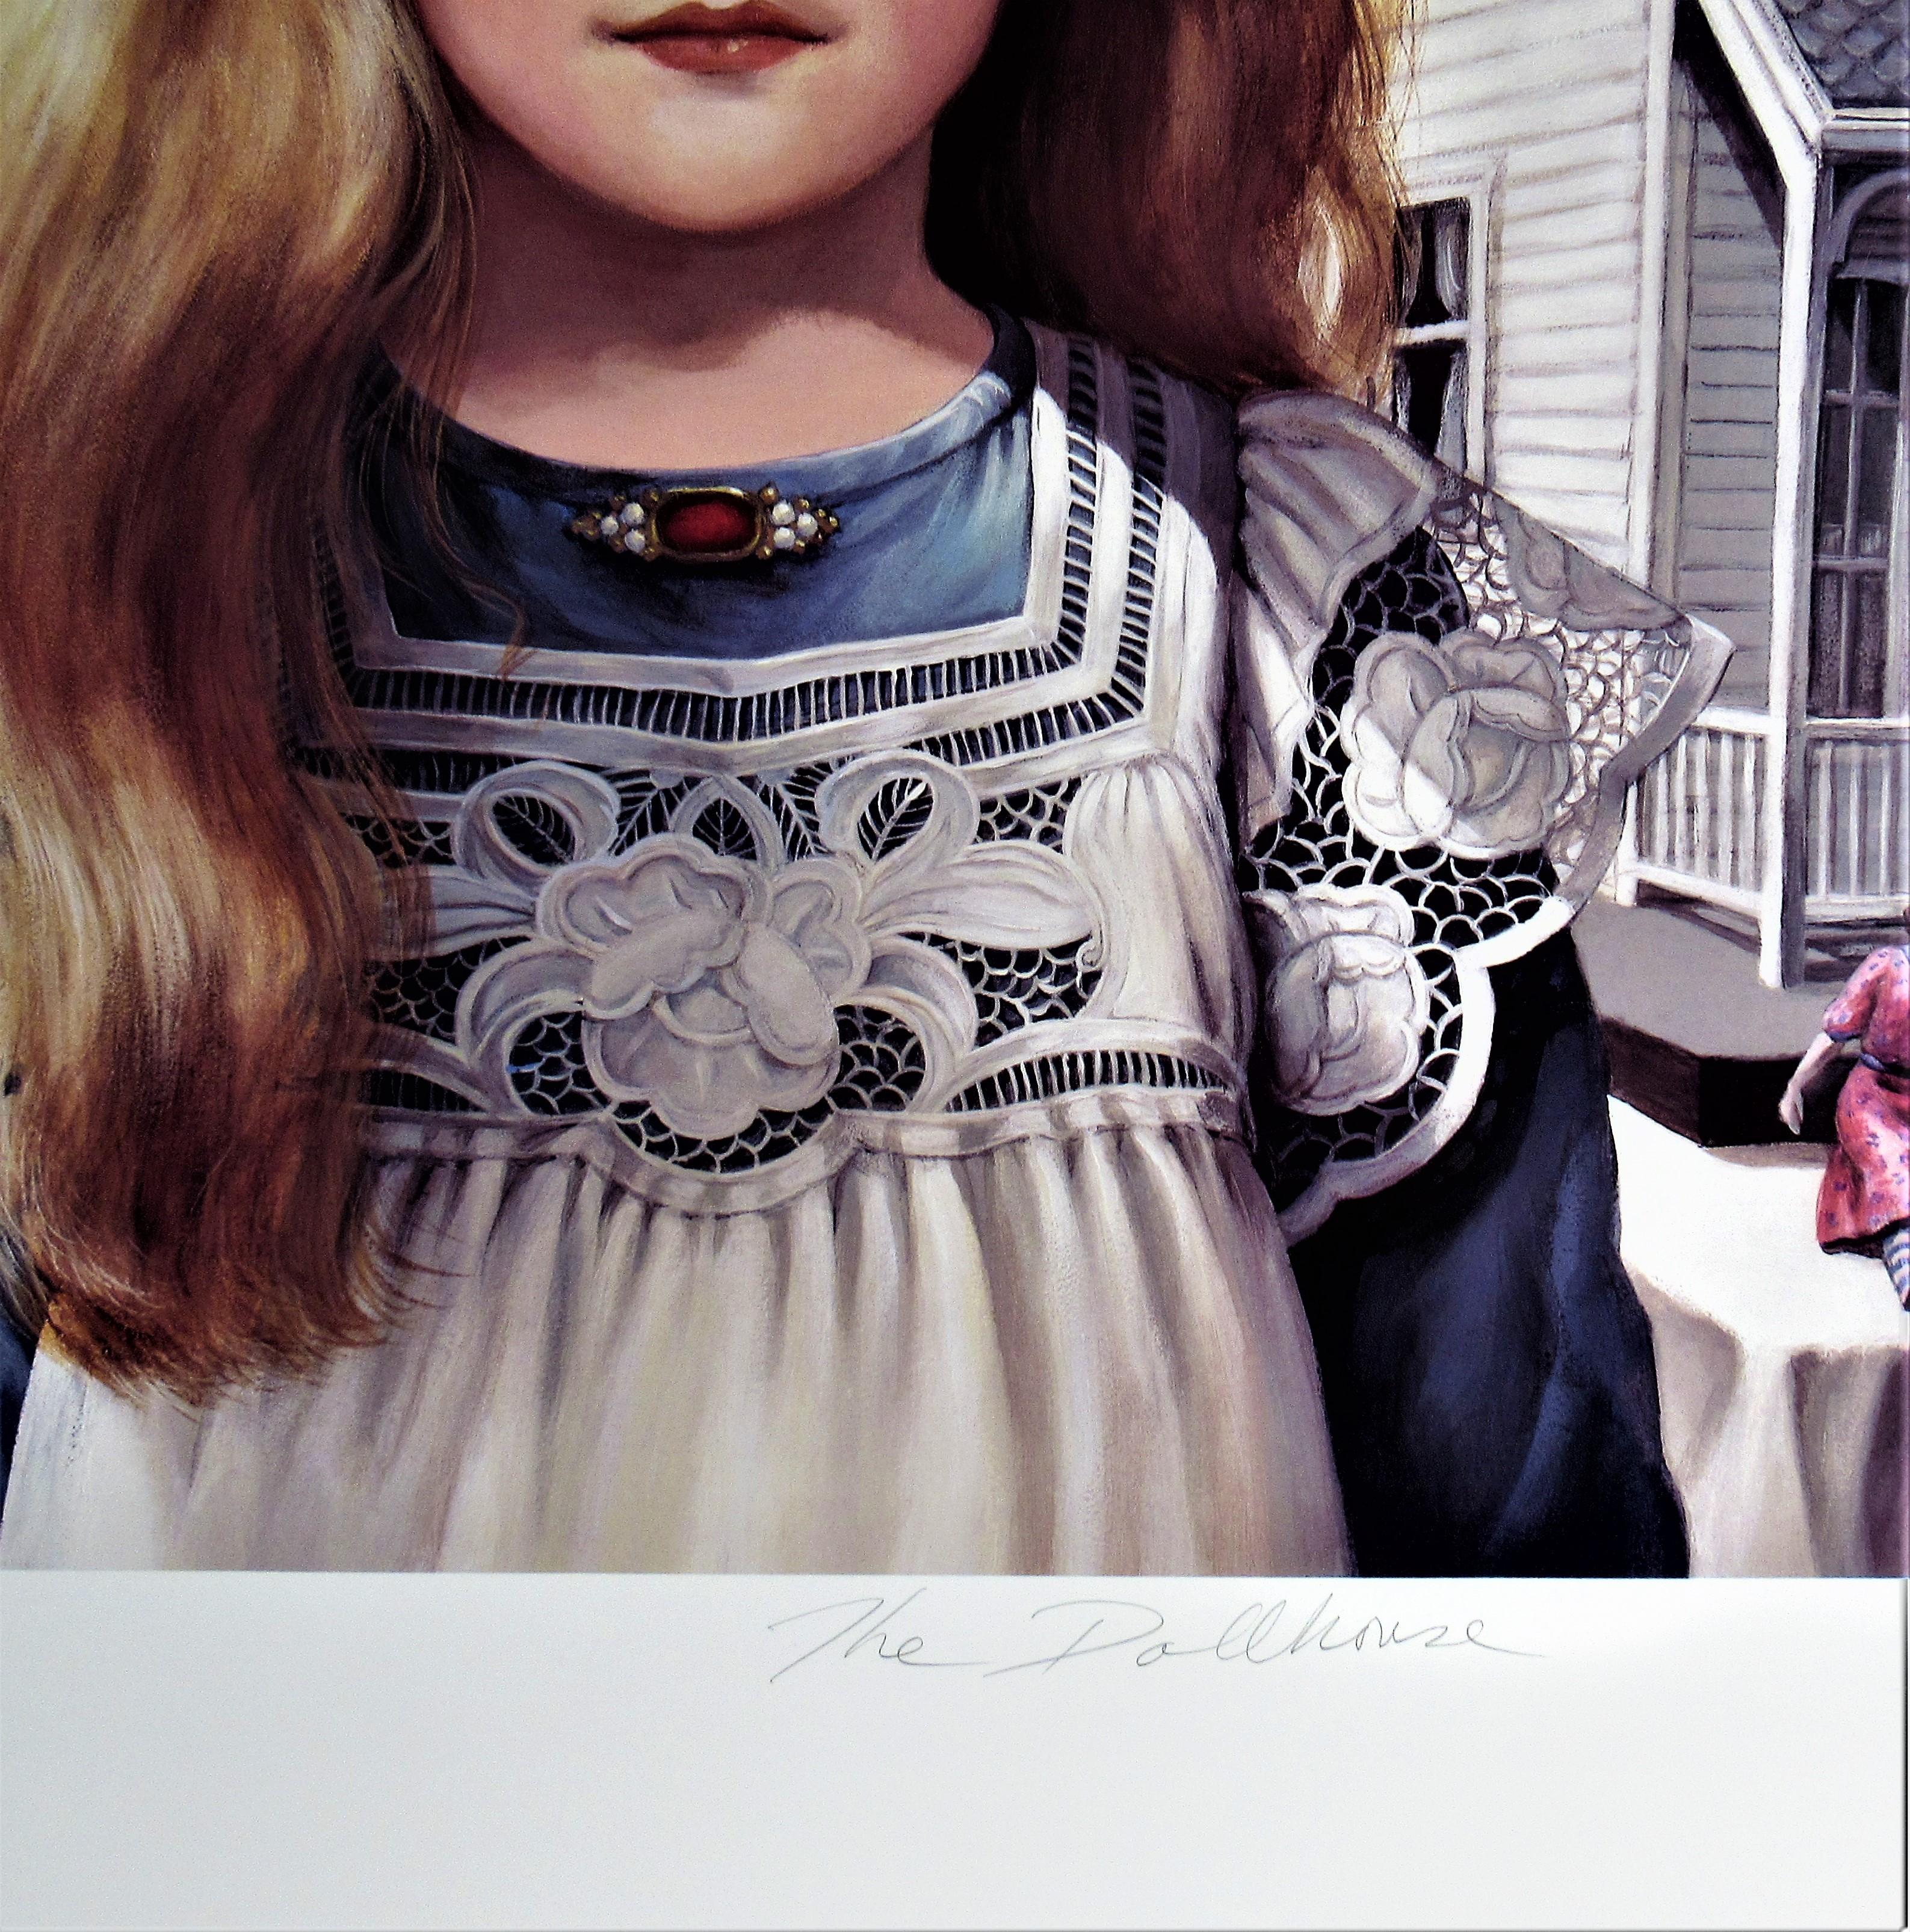 The Dollhouse - Gray Figurative Print by Pati Bannister